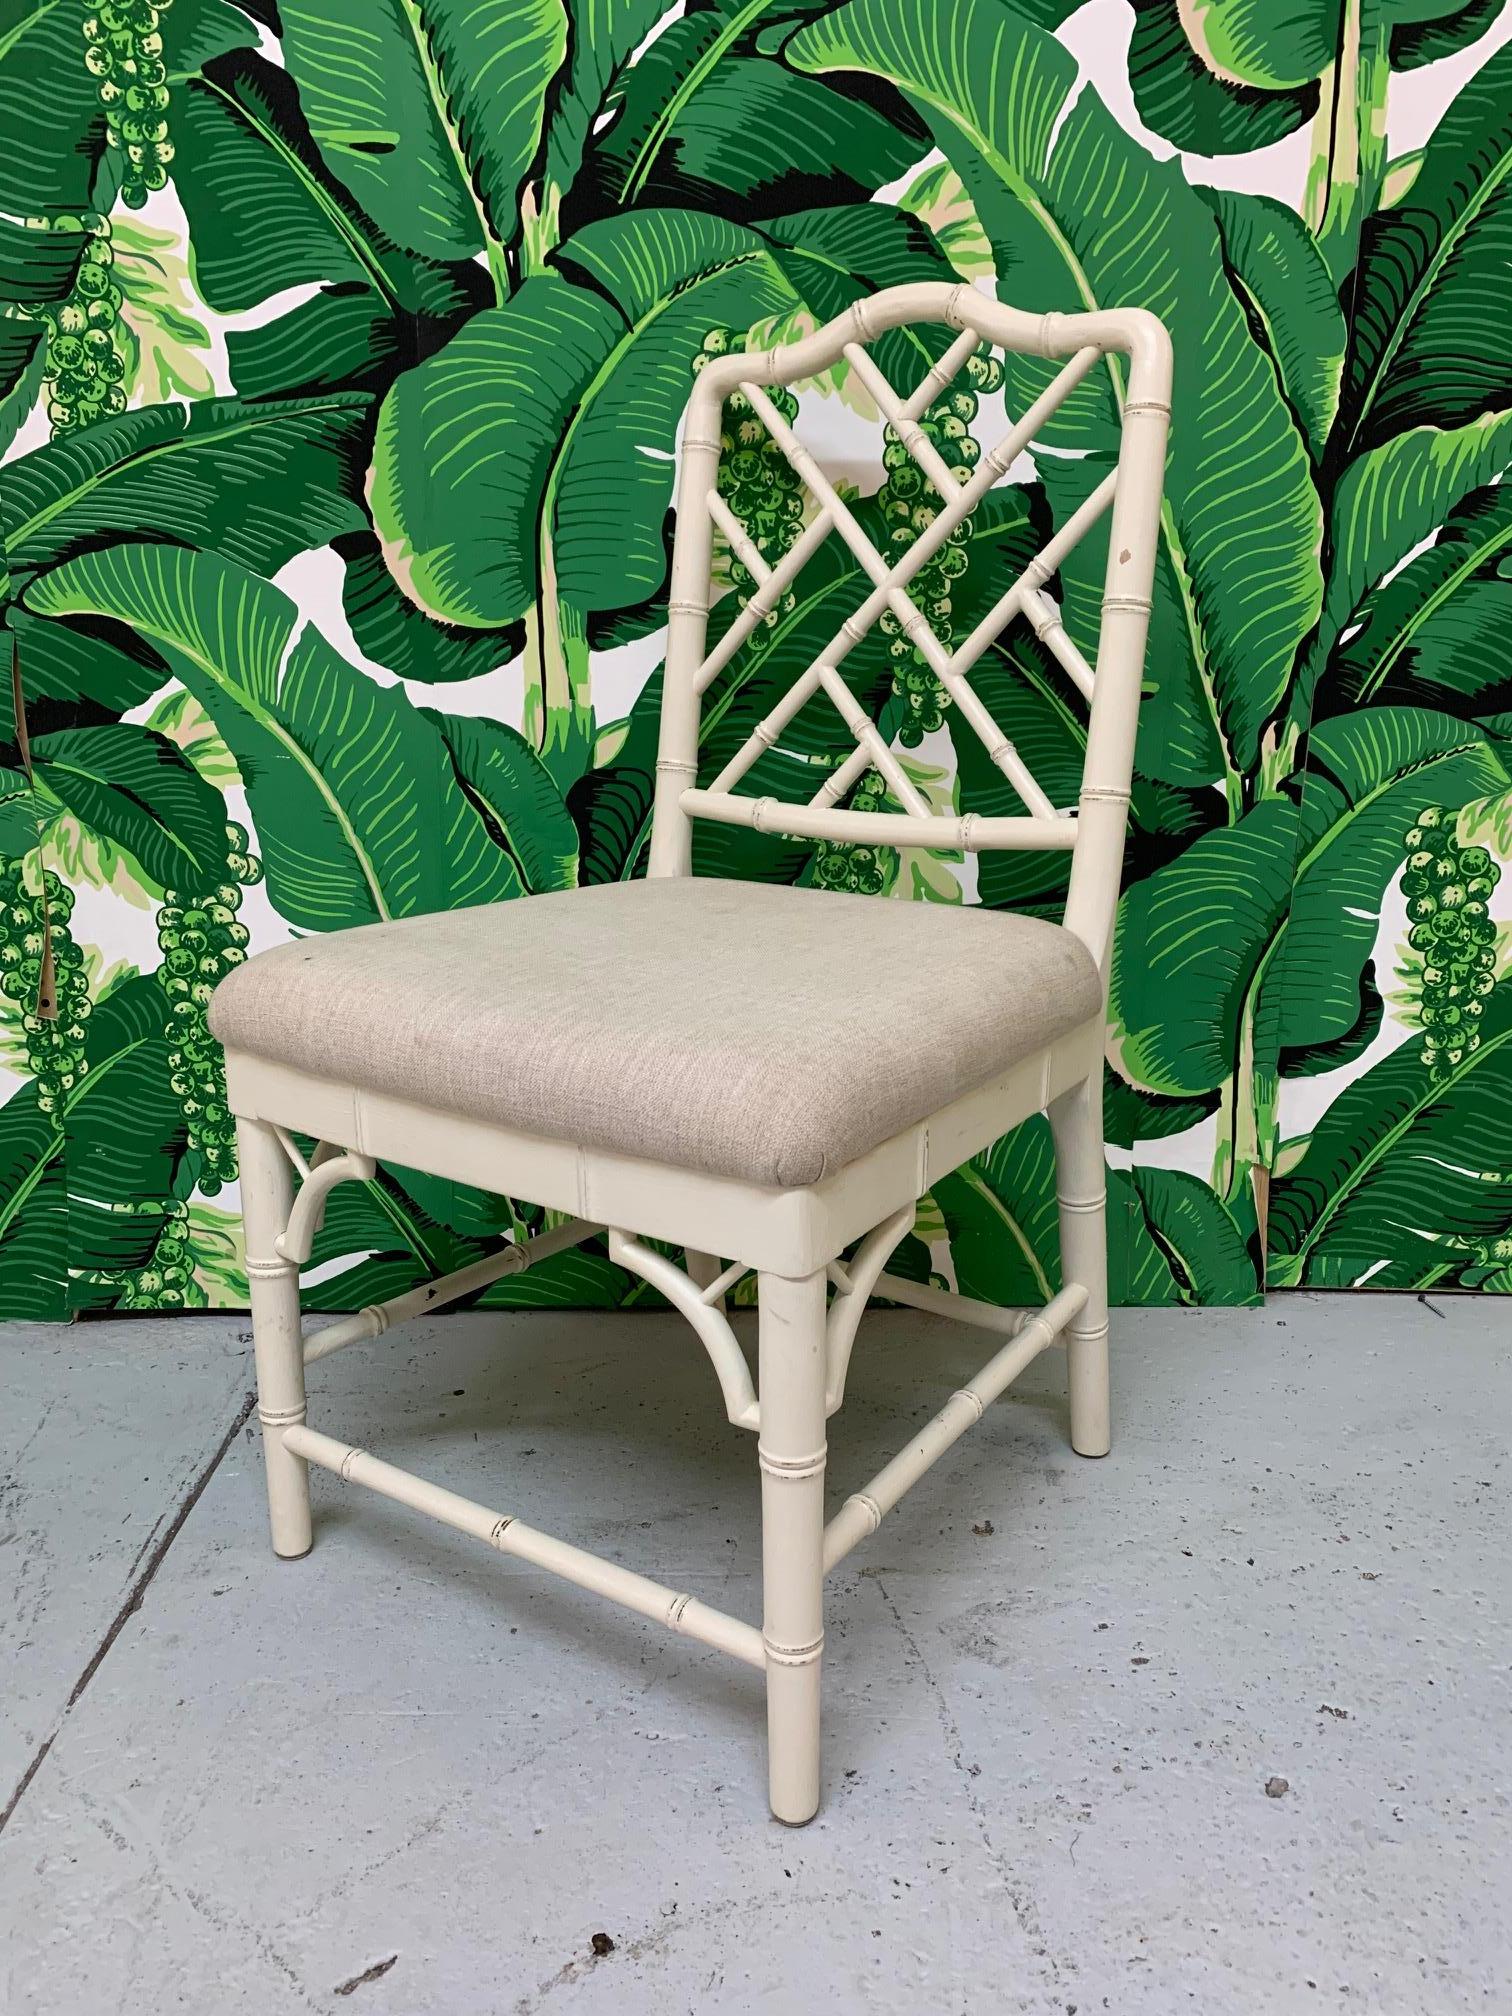 Set of 6 dining chairs in chinoiserie style with Chinese Chippendale style fretwork. Chairs are upholstered in a neutral fabric. All chairs are structurally sound. There is some staining on fabric.